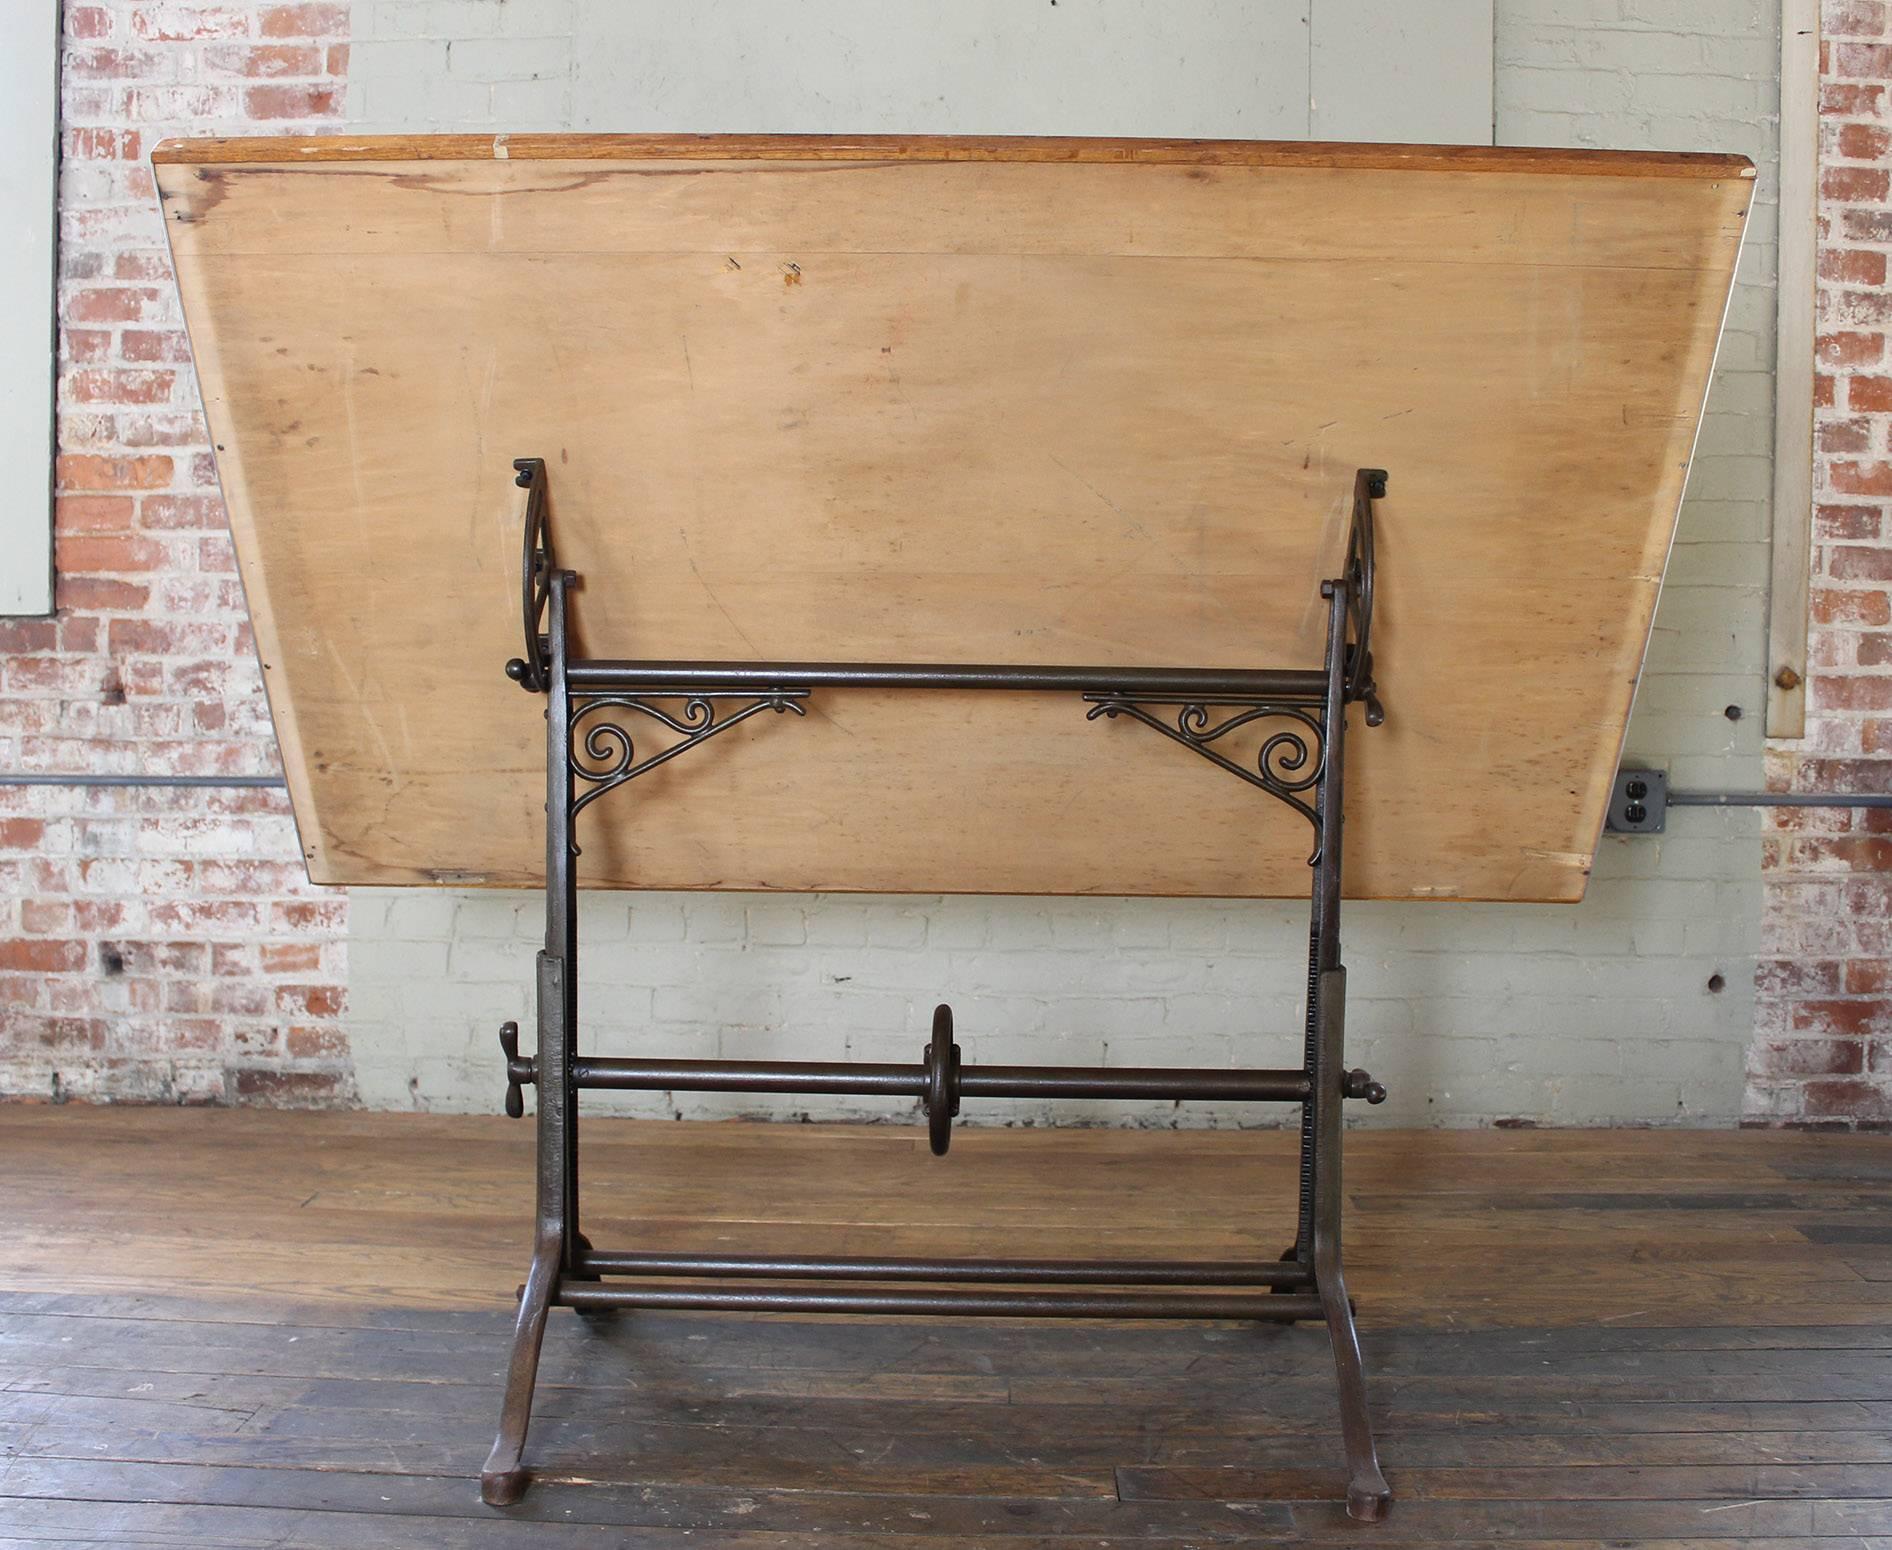 Vintage Industrial antique cast iron and wood ornate adjustable drafting, draftsman, architects table. Top measures 60 1/4" x 37". Top is adjustable from 31 1/4" - 42 1/2" in height.